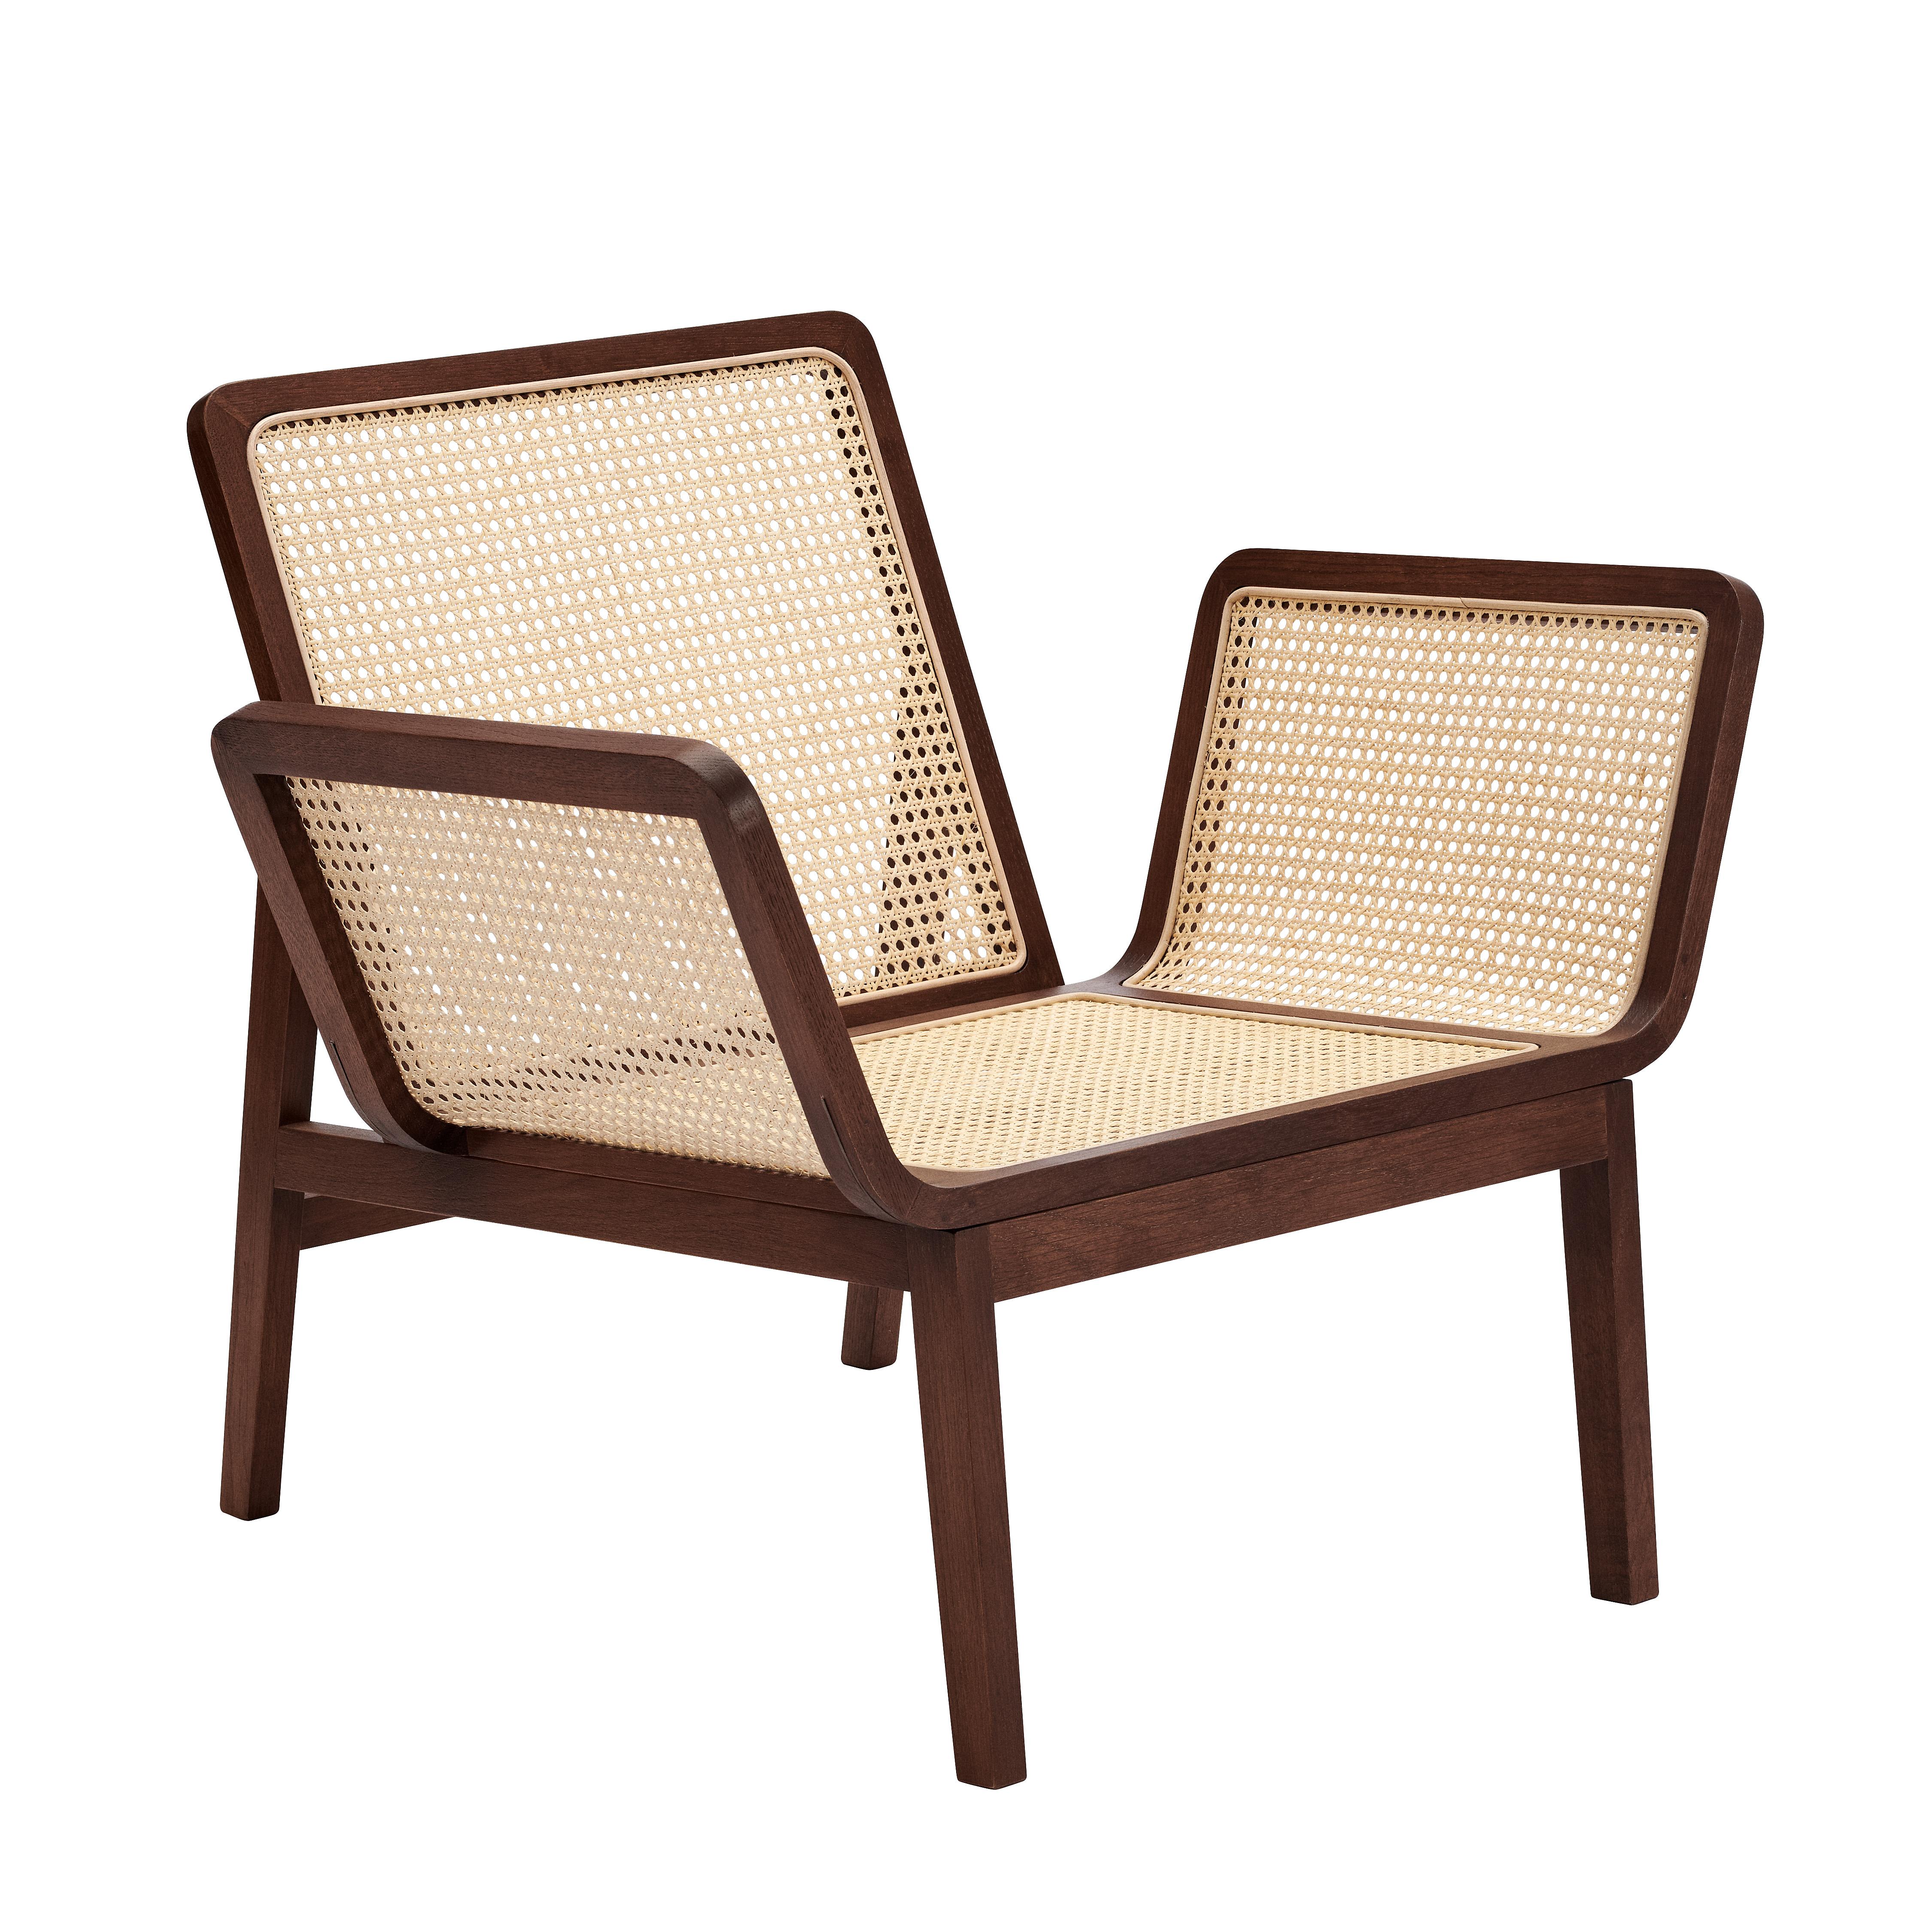 'Le Roi Chair' by Norr11, Smoked Oak and Rattan In New Condition For Sale In Paris, FR